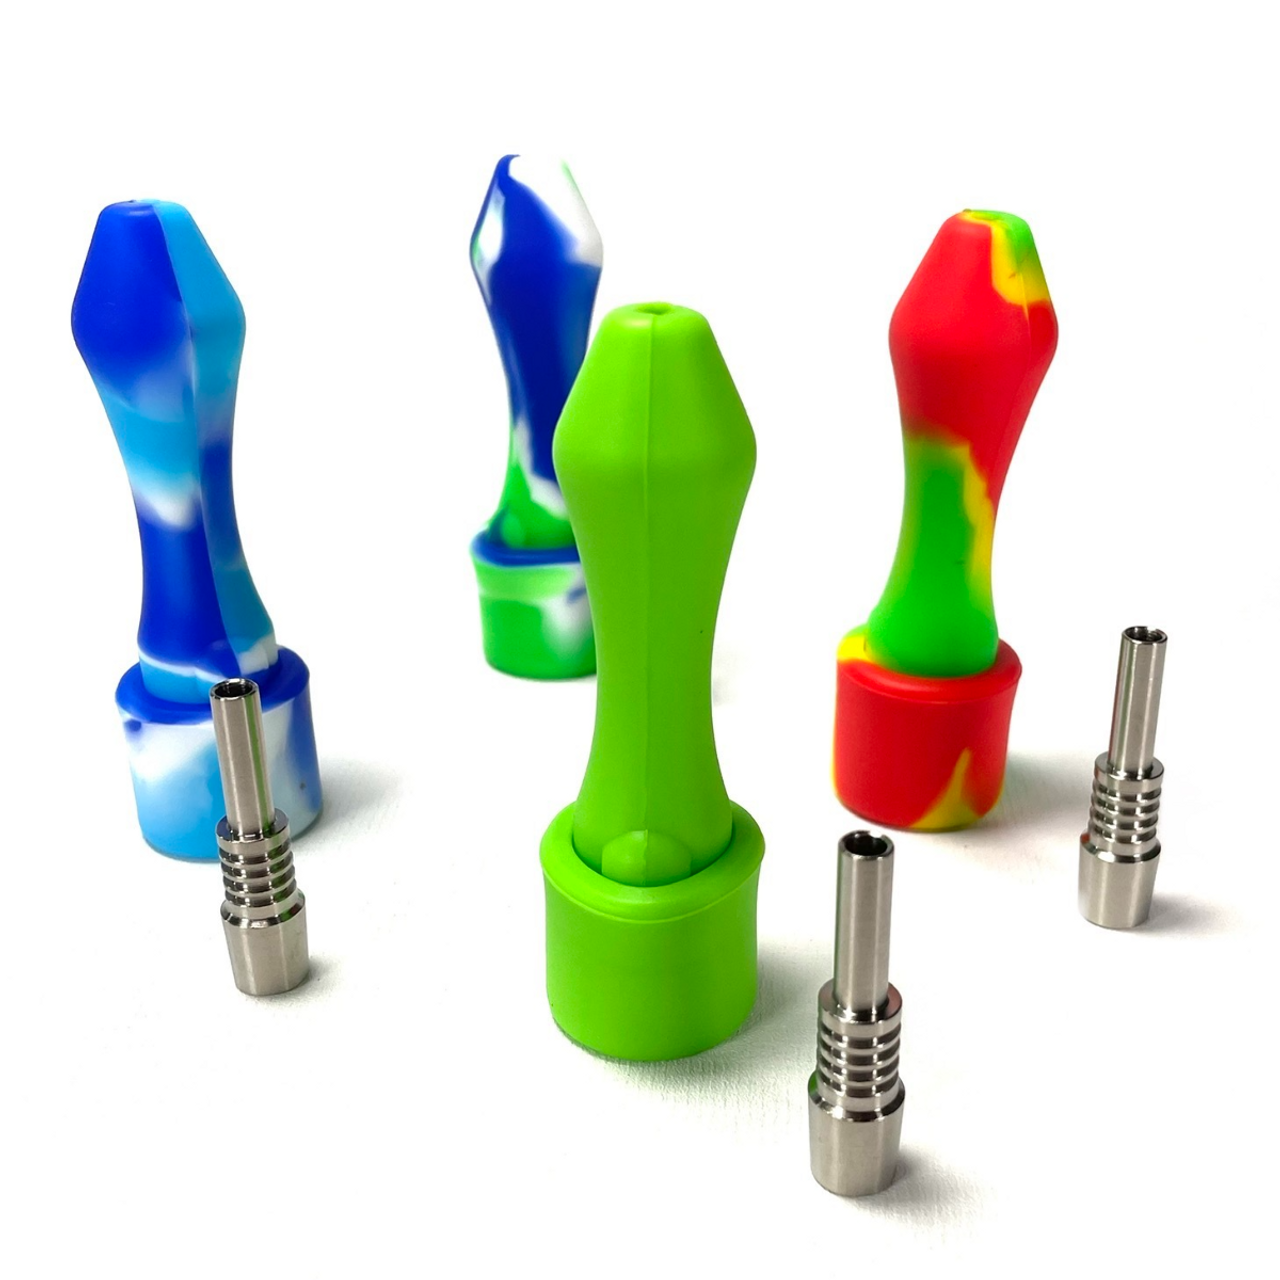 10mm Ti Pocket Silicone Nectar Collector 1 Count Assort - Puffr